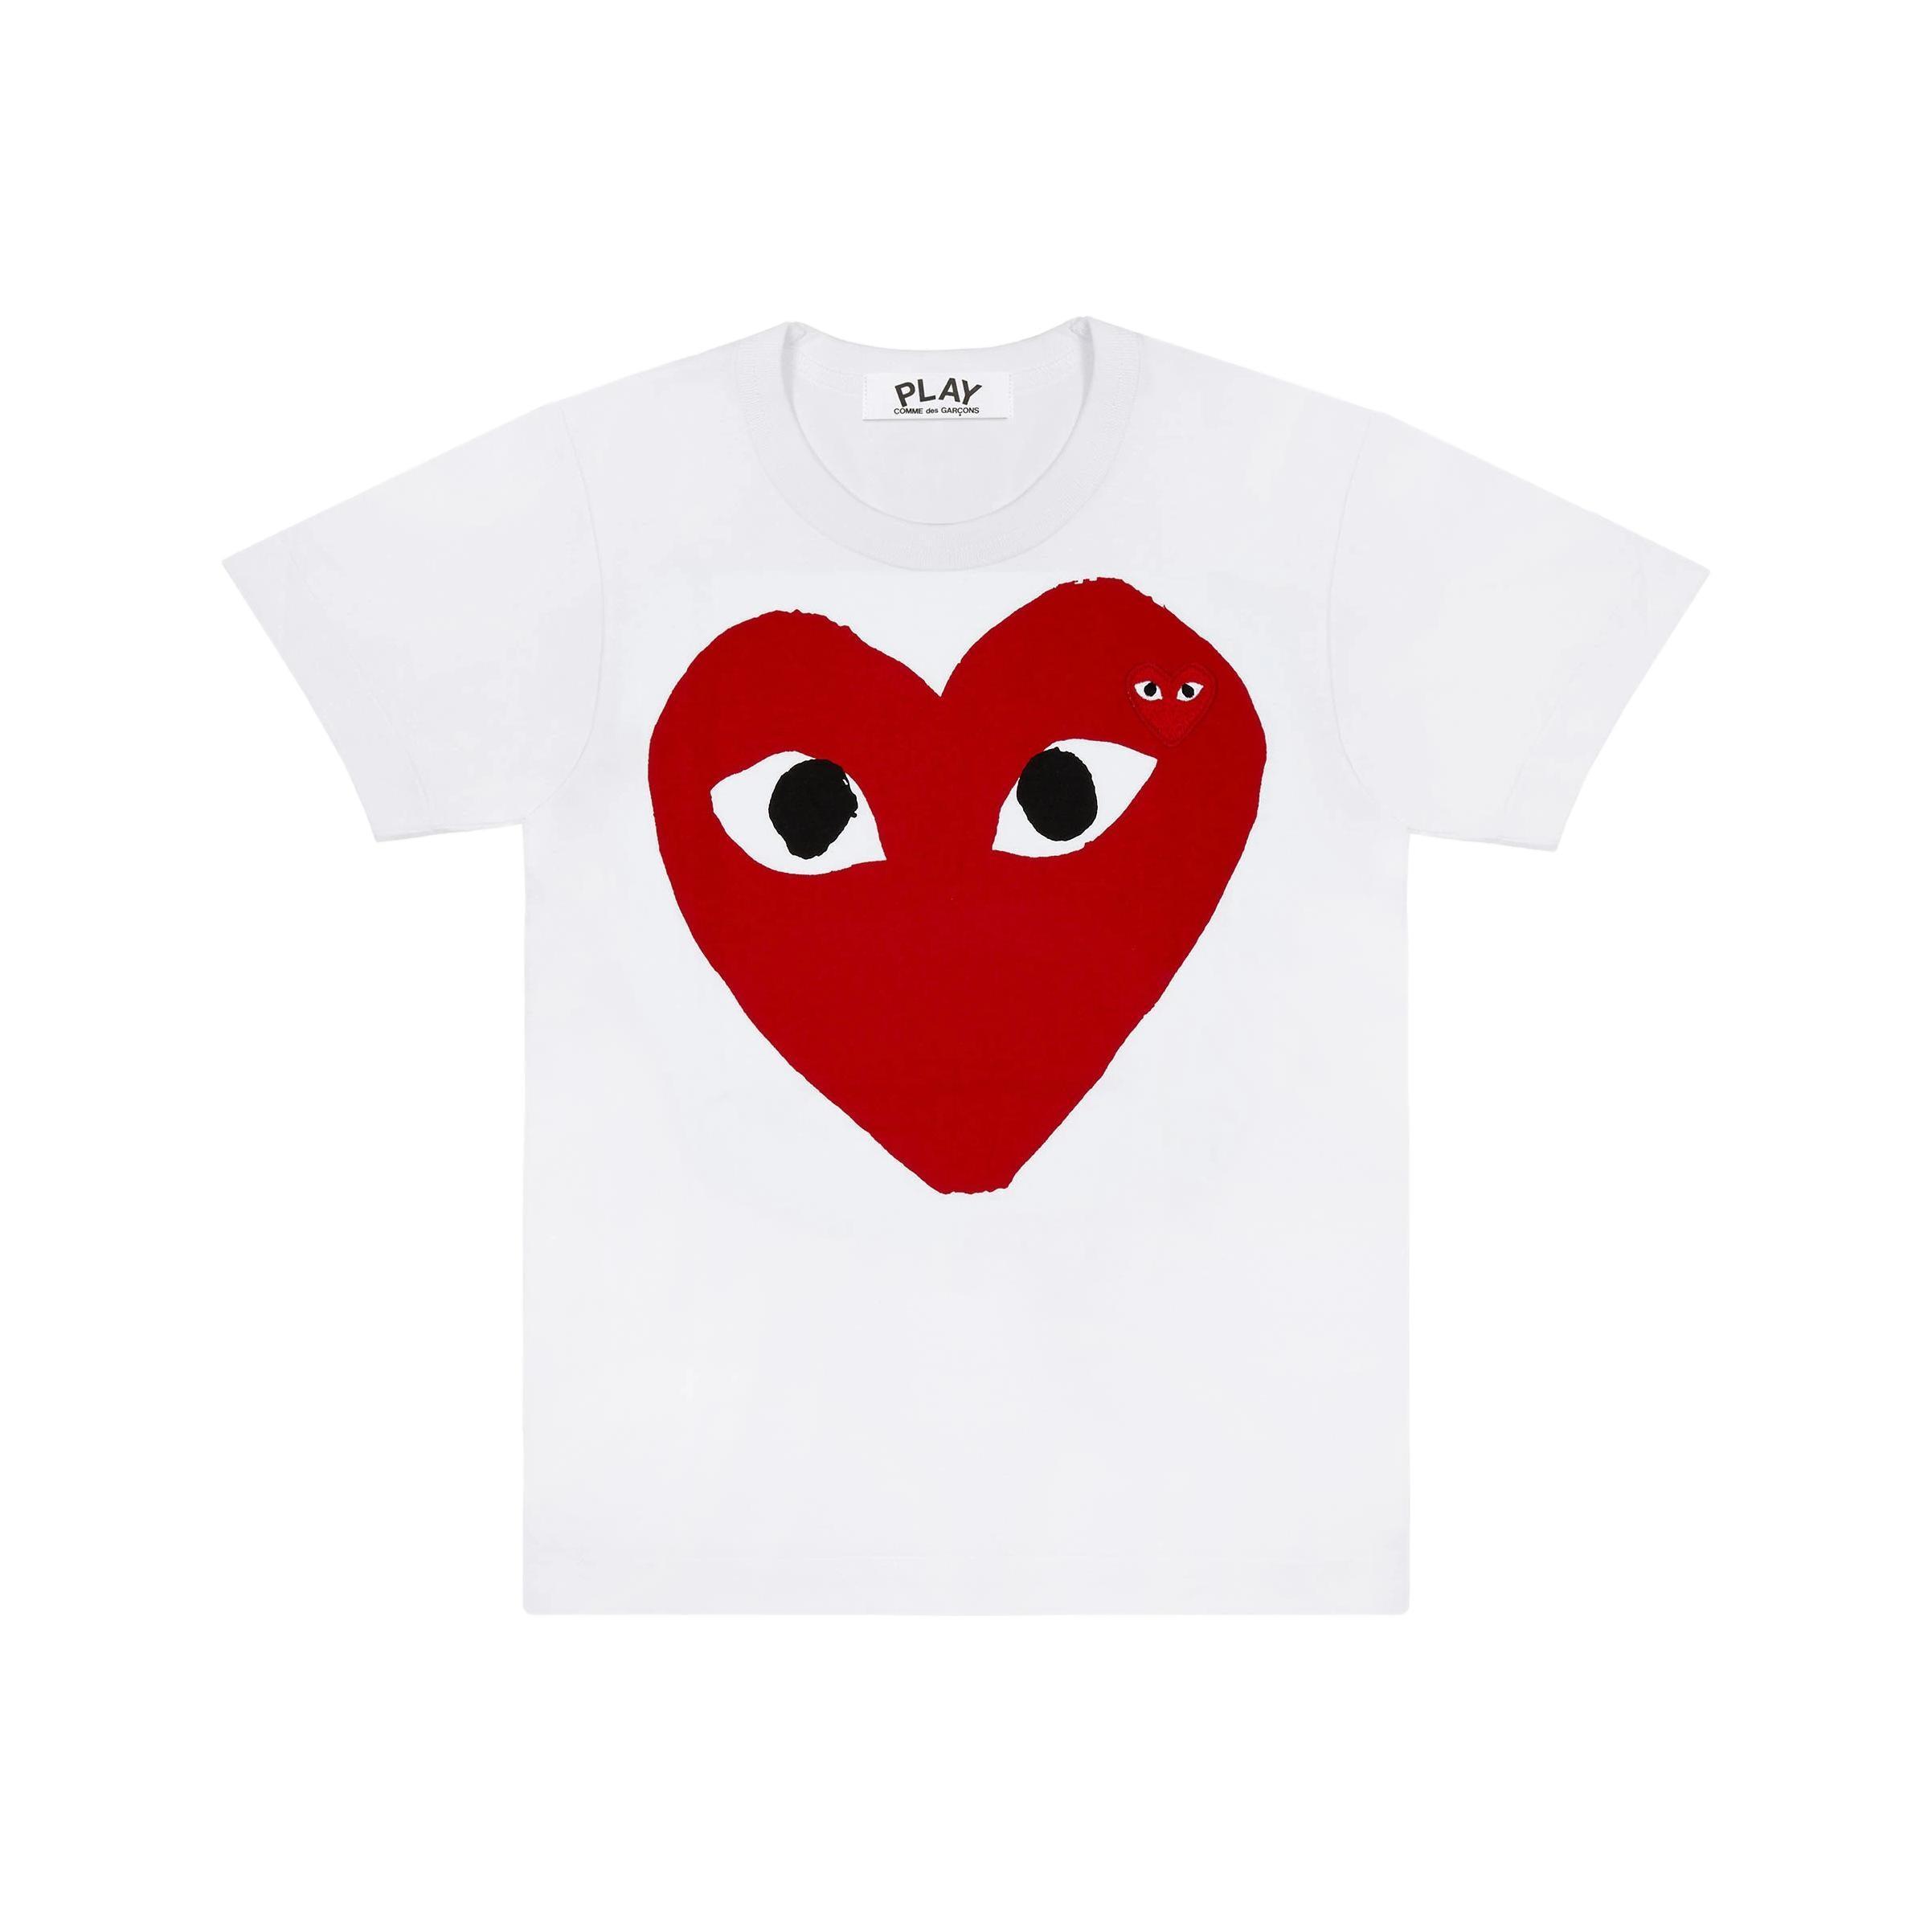 COMME DES GARCONS HEART EYES T-SHIRT - Gravity NYC